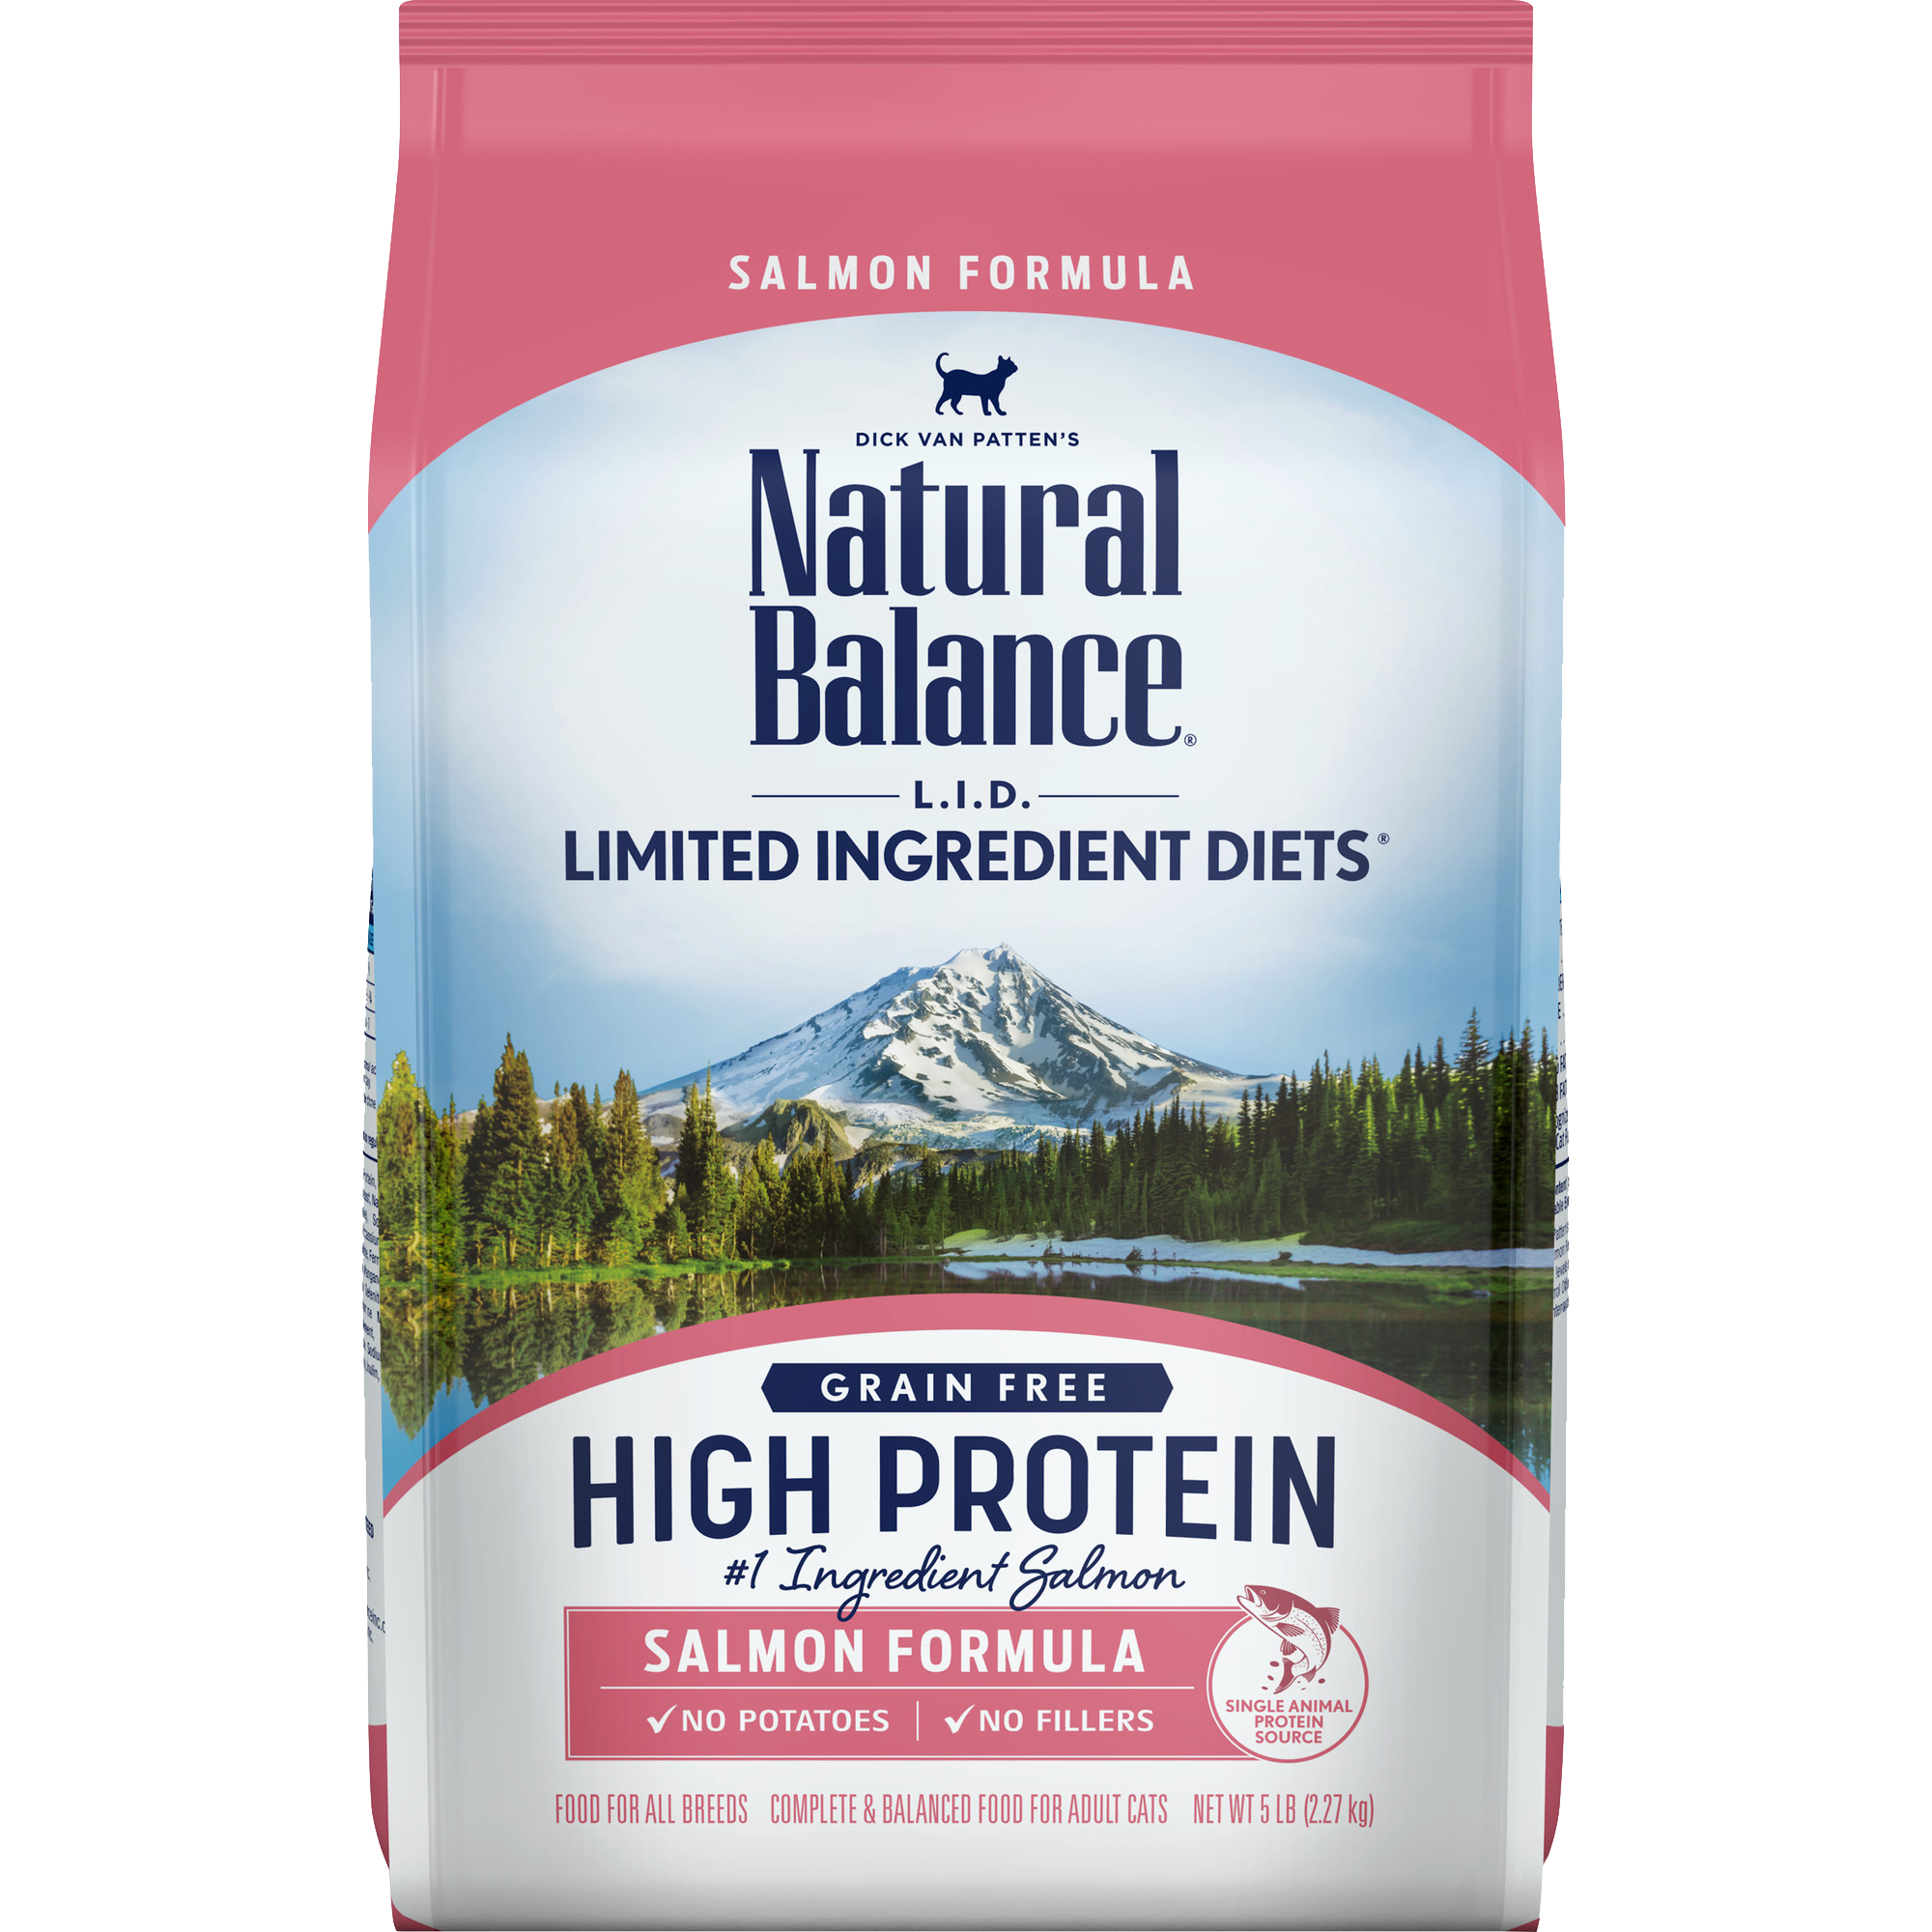 Natural Balance Limited Ingredient Diet High Protein Salmon Dry Cat